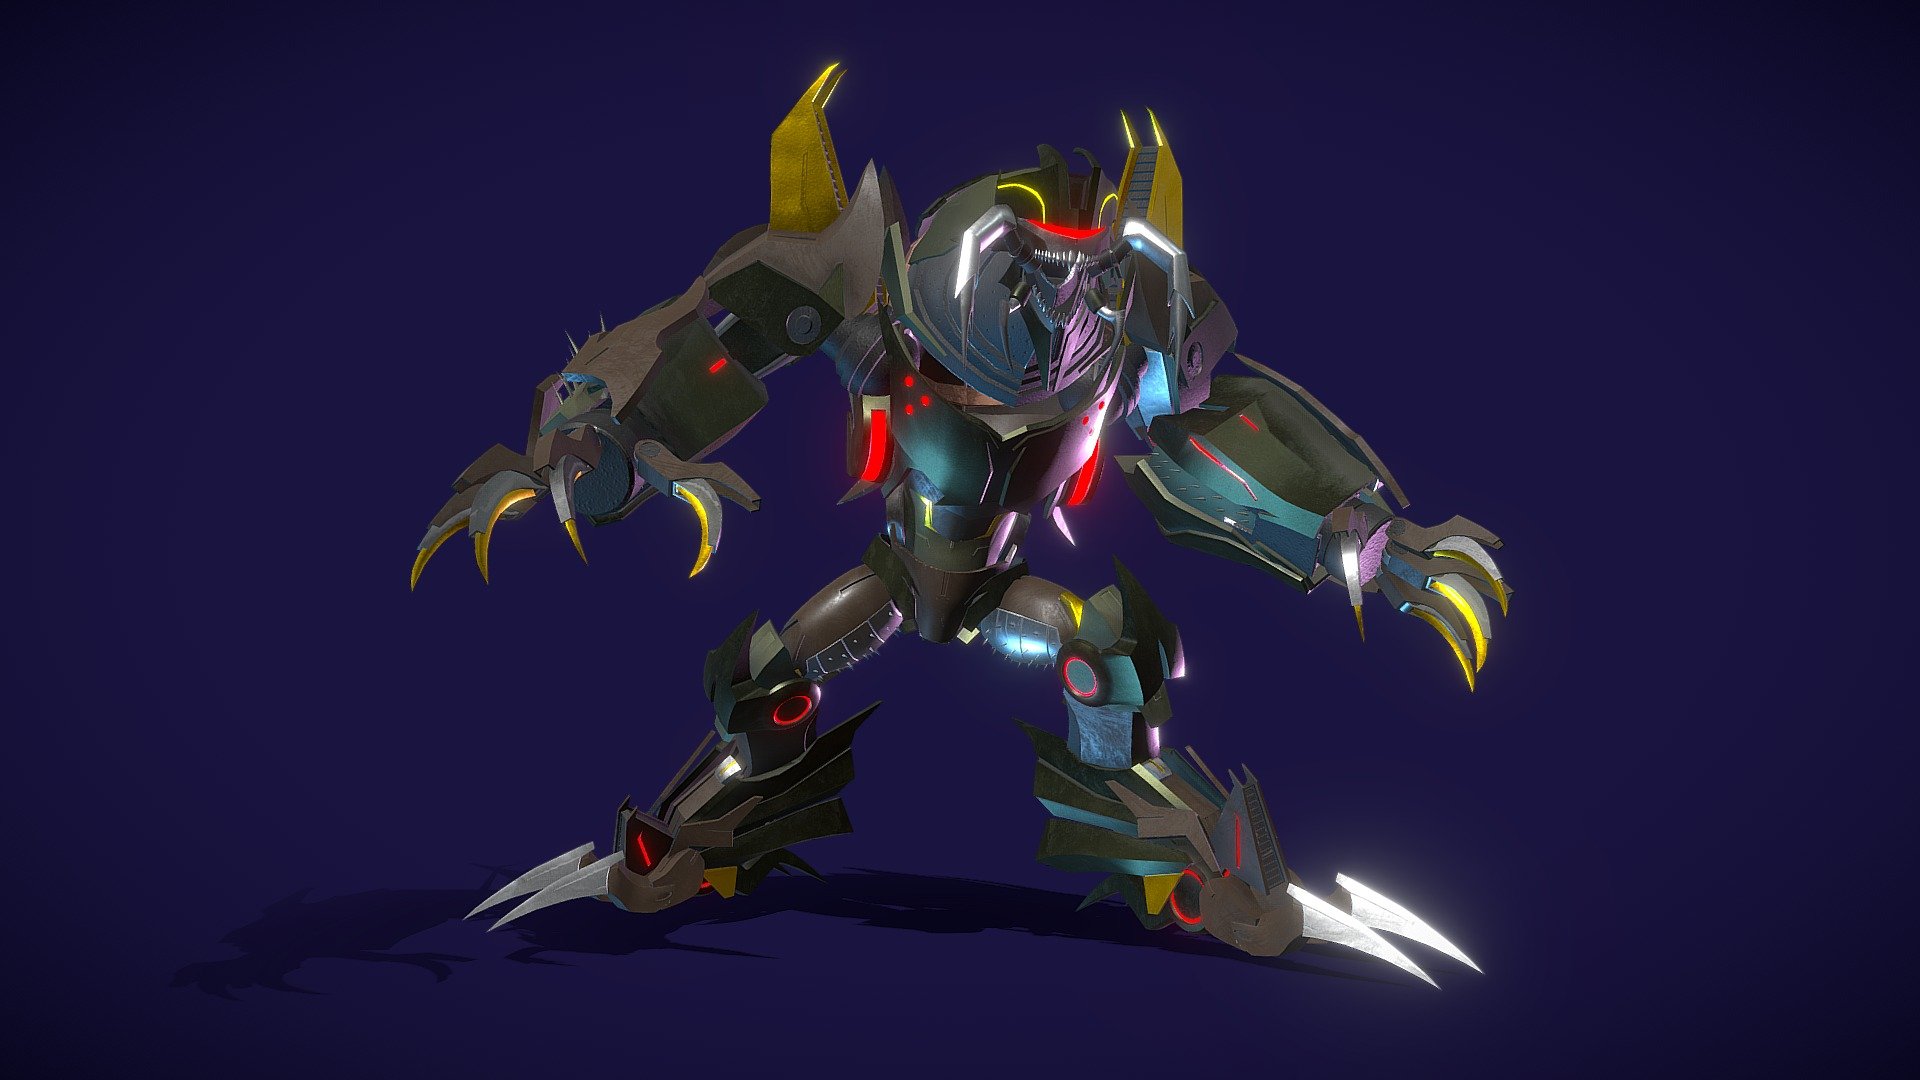 3D model rig of Insecticon, an insect-like type of Transformers from the Transformers Prime series. With rigging and PBR materials, ensuring appropriate usability for animations and games.

The native file type is BLEND as it was created with Blender, however with OBJ, FBX as well as PBR textures provided, it will work with any 3D programs.

All rights of the Transformers brand belongs to Hasbro.

&mdash;NOTES&mdash;
For a more in depth look of the purchasable package, check out the portfolio post: https://www.artstation.com/artwork/RnYvbE

&mdash;DETAILS&mdash;

In this package includes:





Blender file (.BLEND) with armature rigging, proper materials and PBR textures set up.




PBR textures in 4K, including these maps: Color, Metallic, Specular, Roughness, Emission.




OBJ and FBX files.



The model in Blender project file also completed with Crease edges and therefor, subdivision ready.

Thank you for your support of my products and look out for more soon 3d model